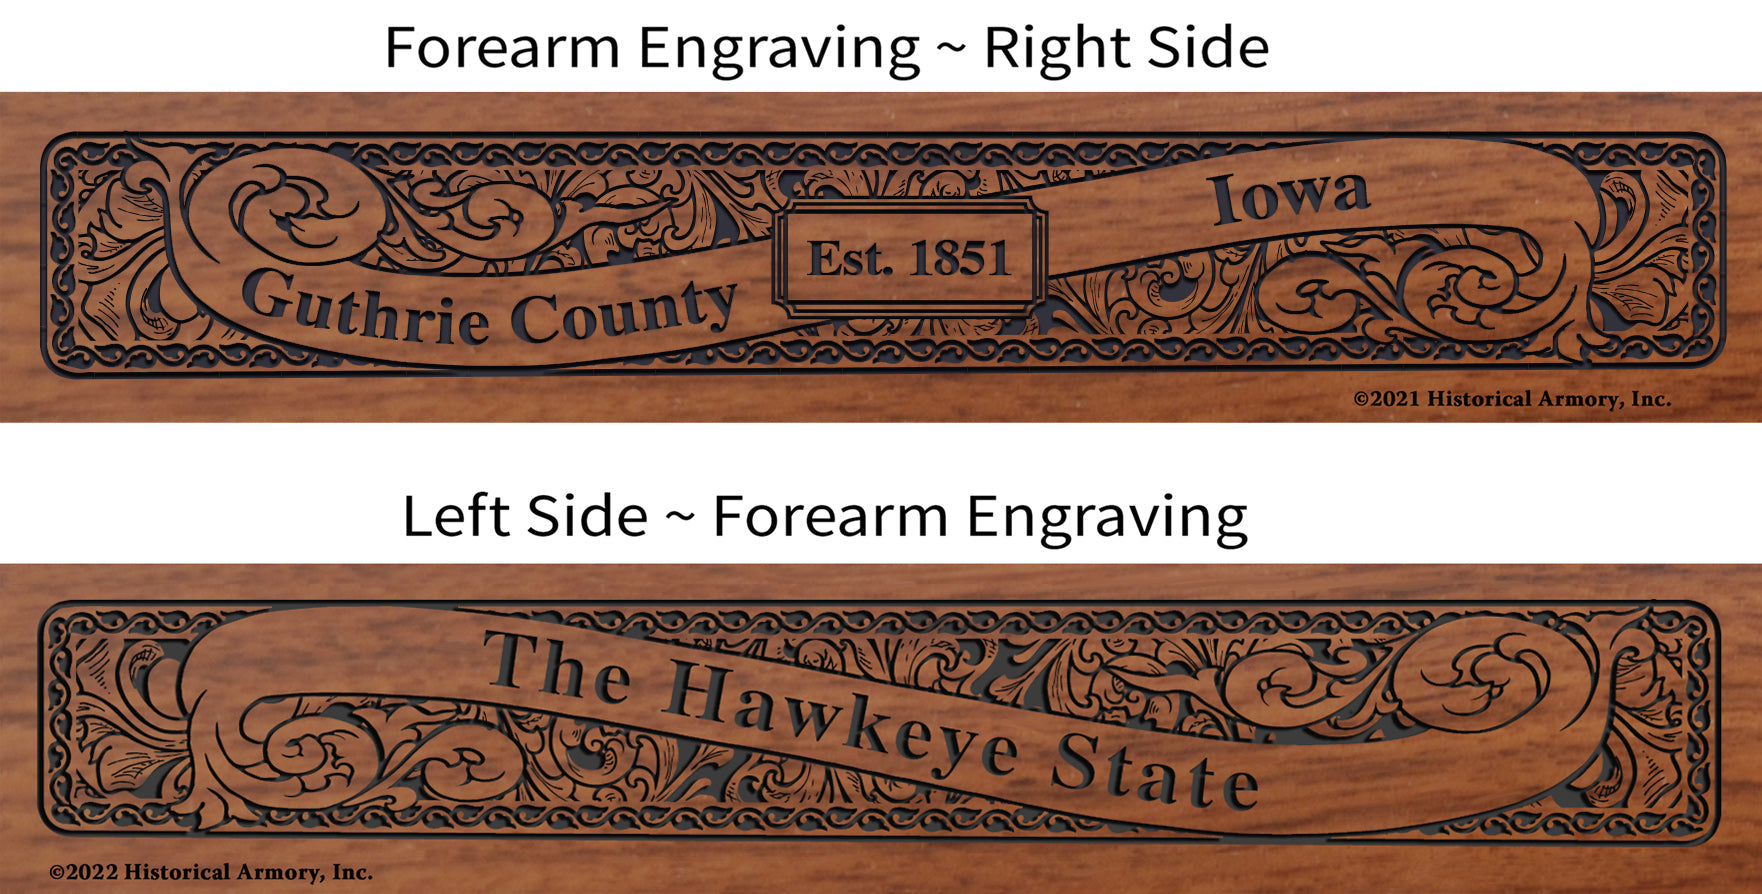 Guthrie County Iowa Engraved Rifle Forearm